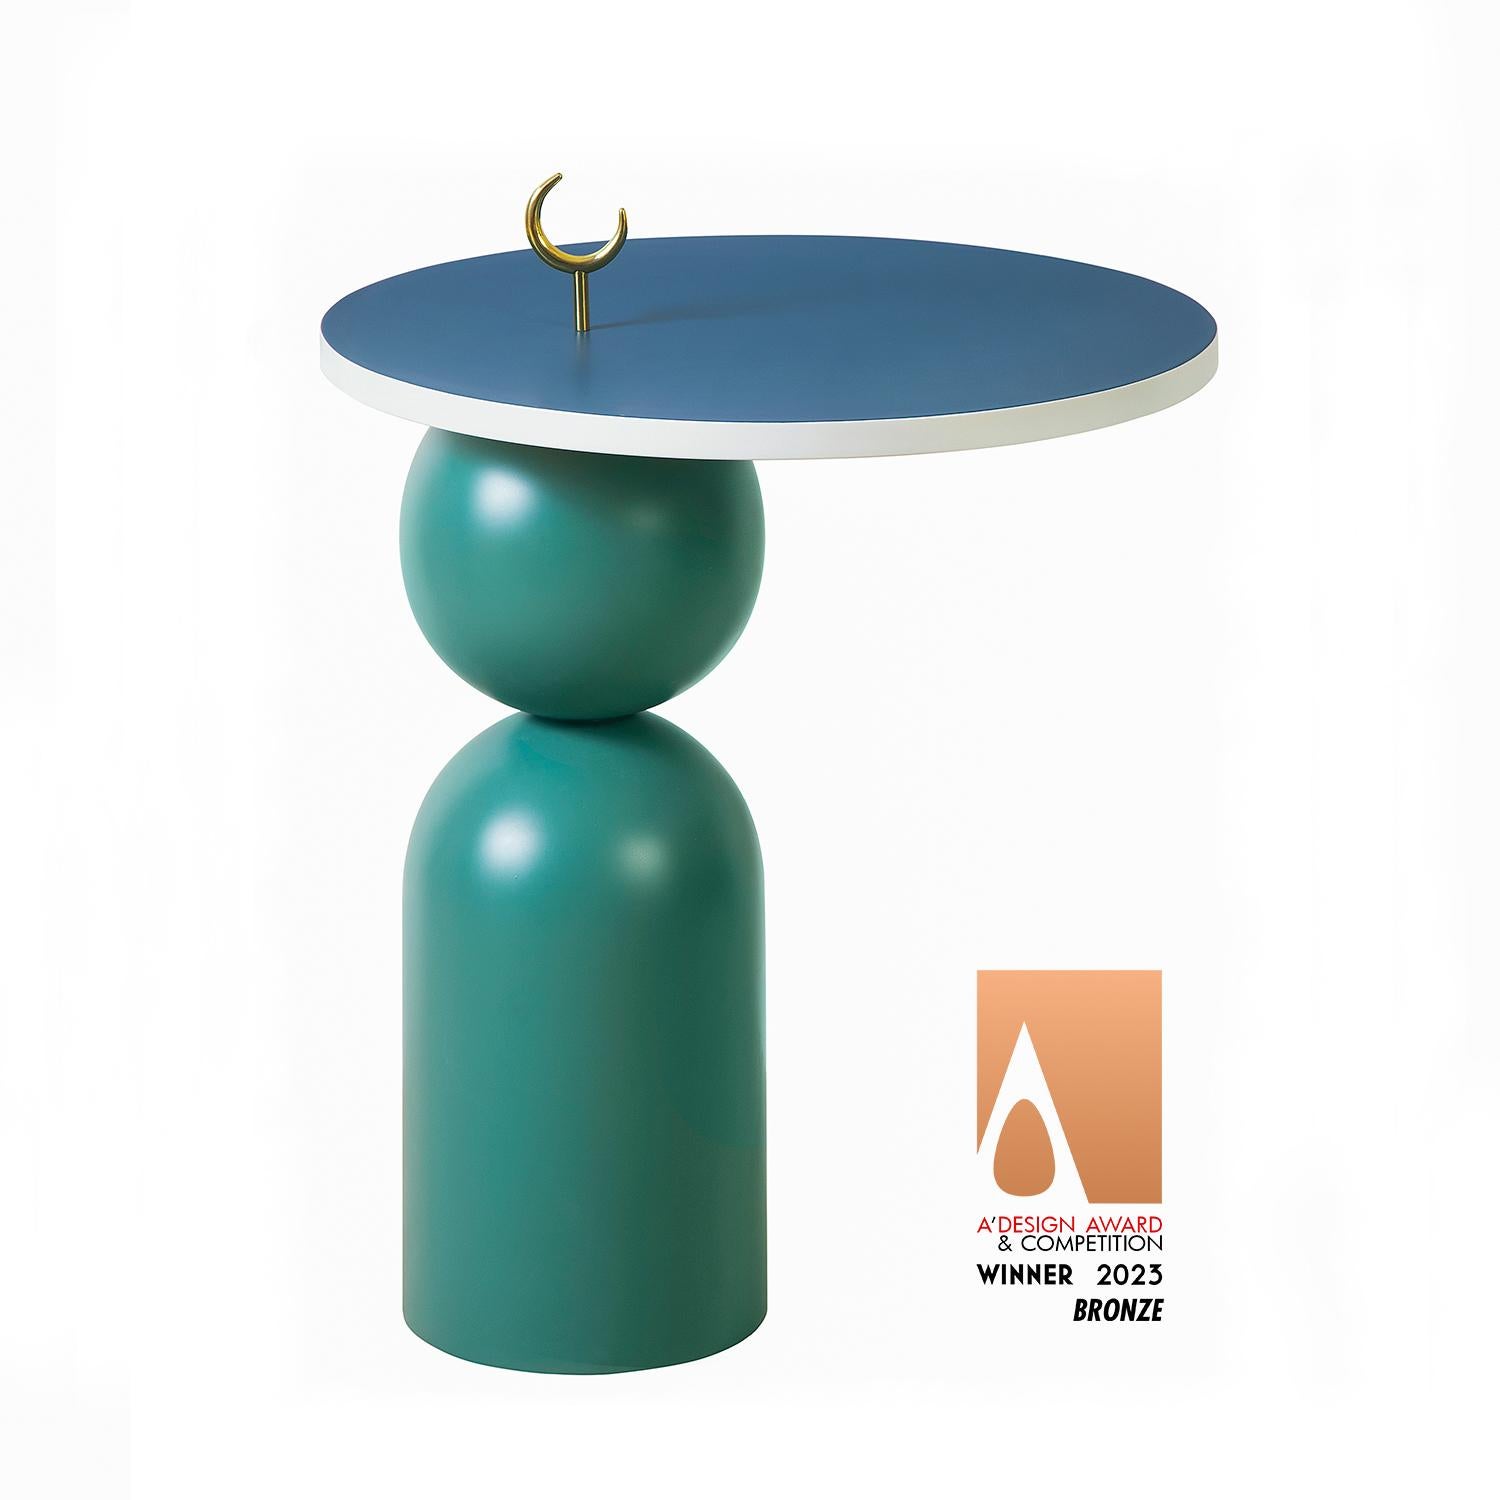 A' Design Award  Bronze - Furniture 2023
This piece is a tribute of the work 